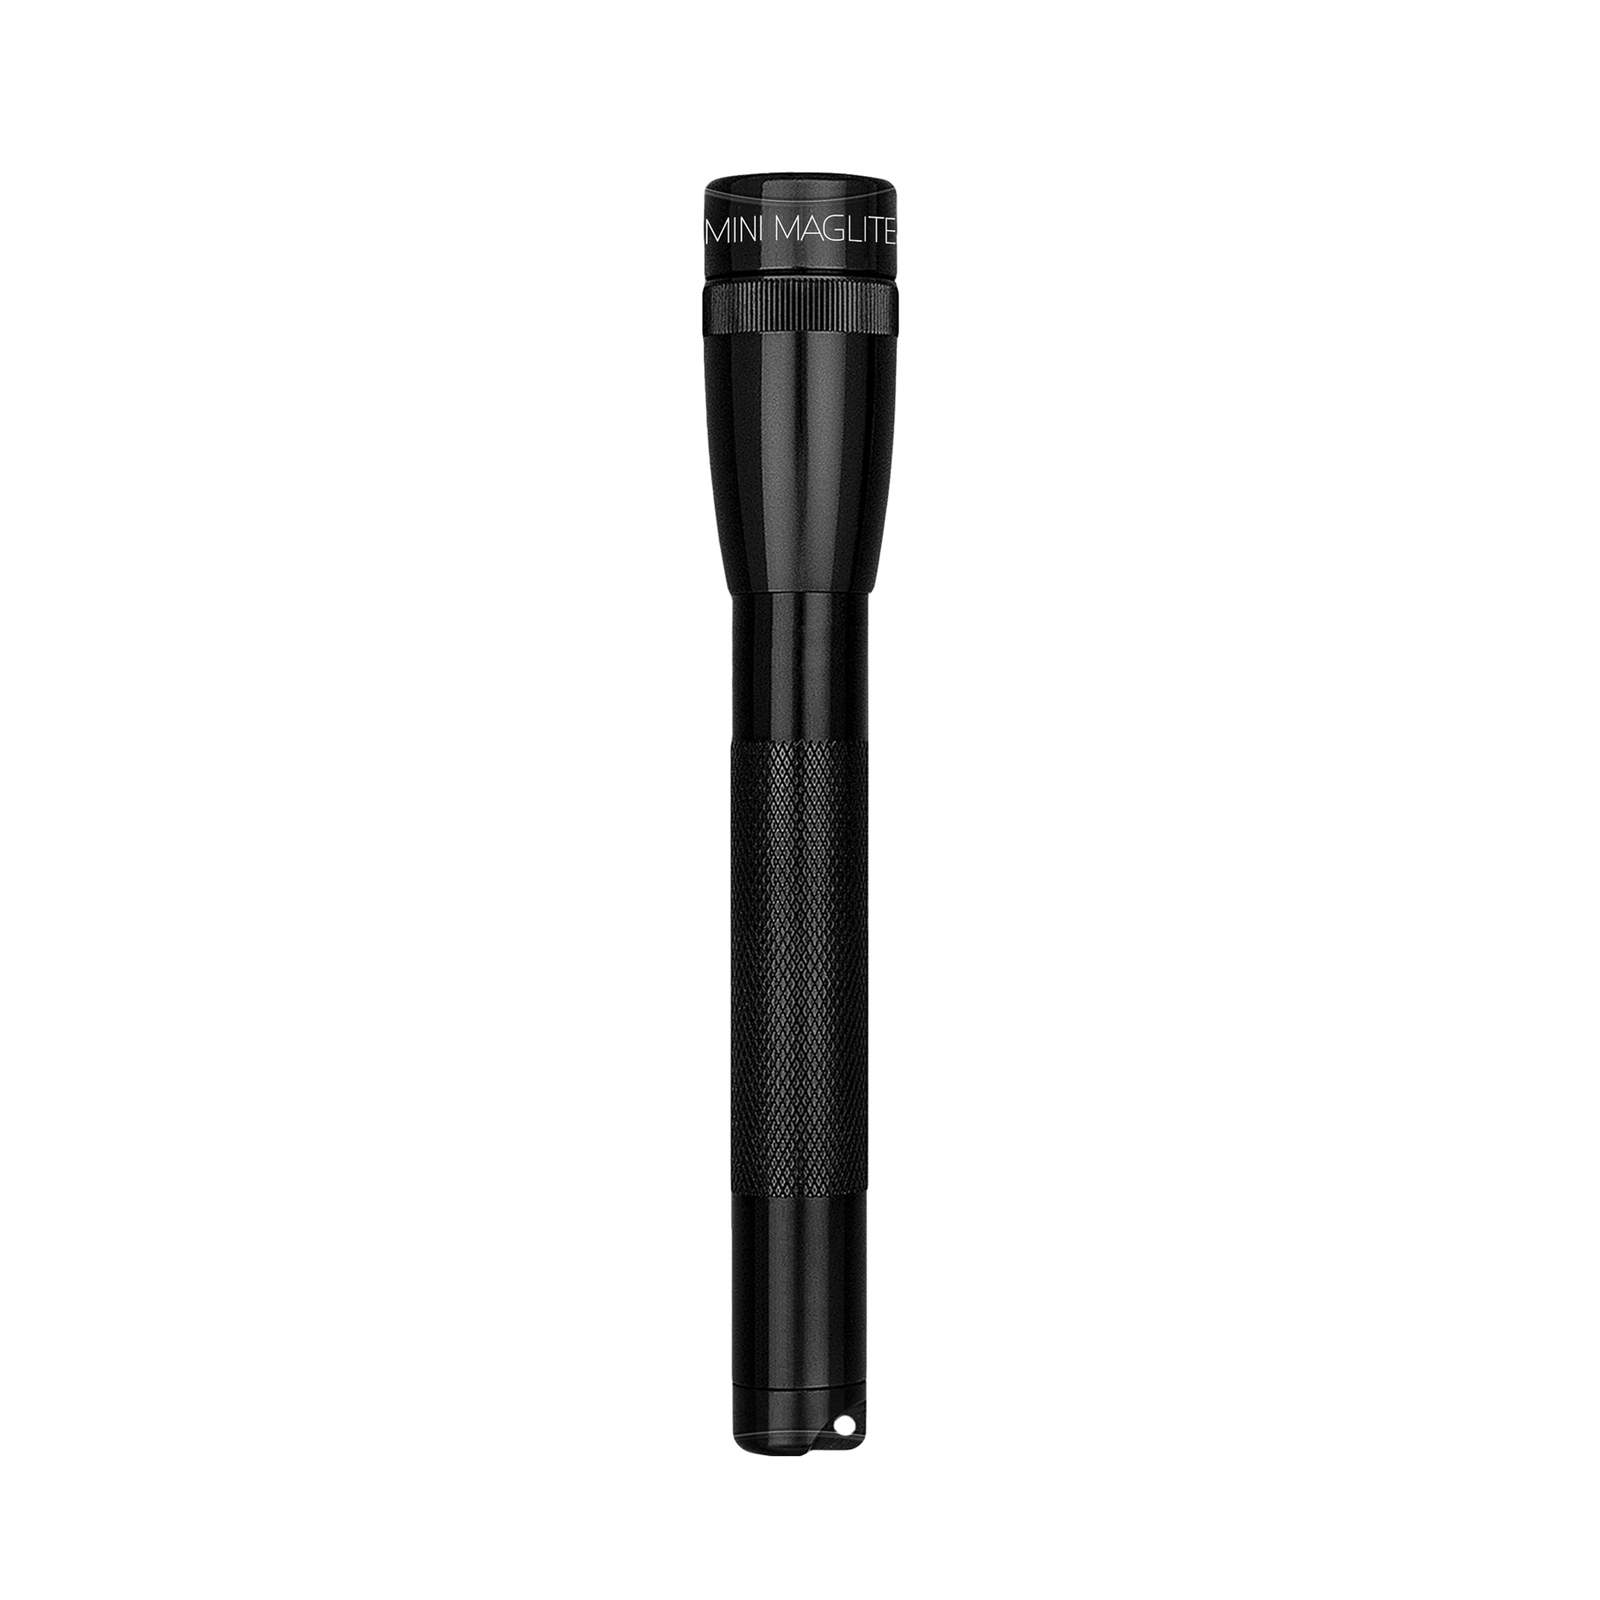 Maglite LED torch Mini, 2-Cell AA, holster, black